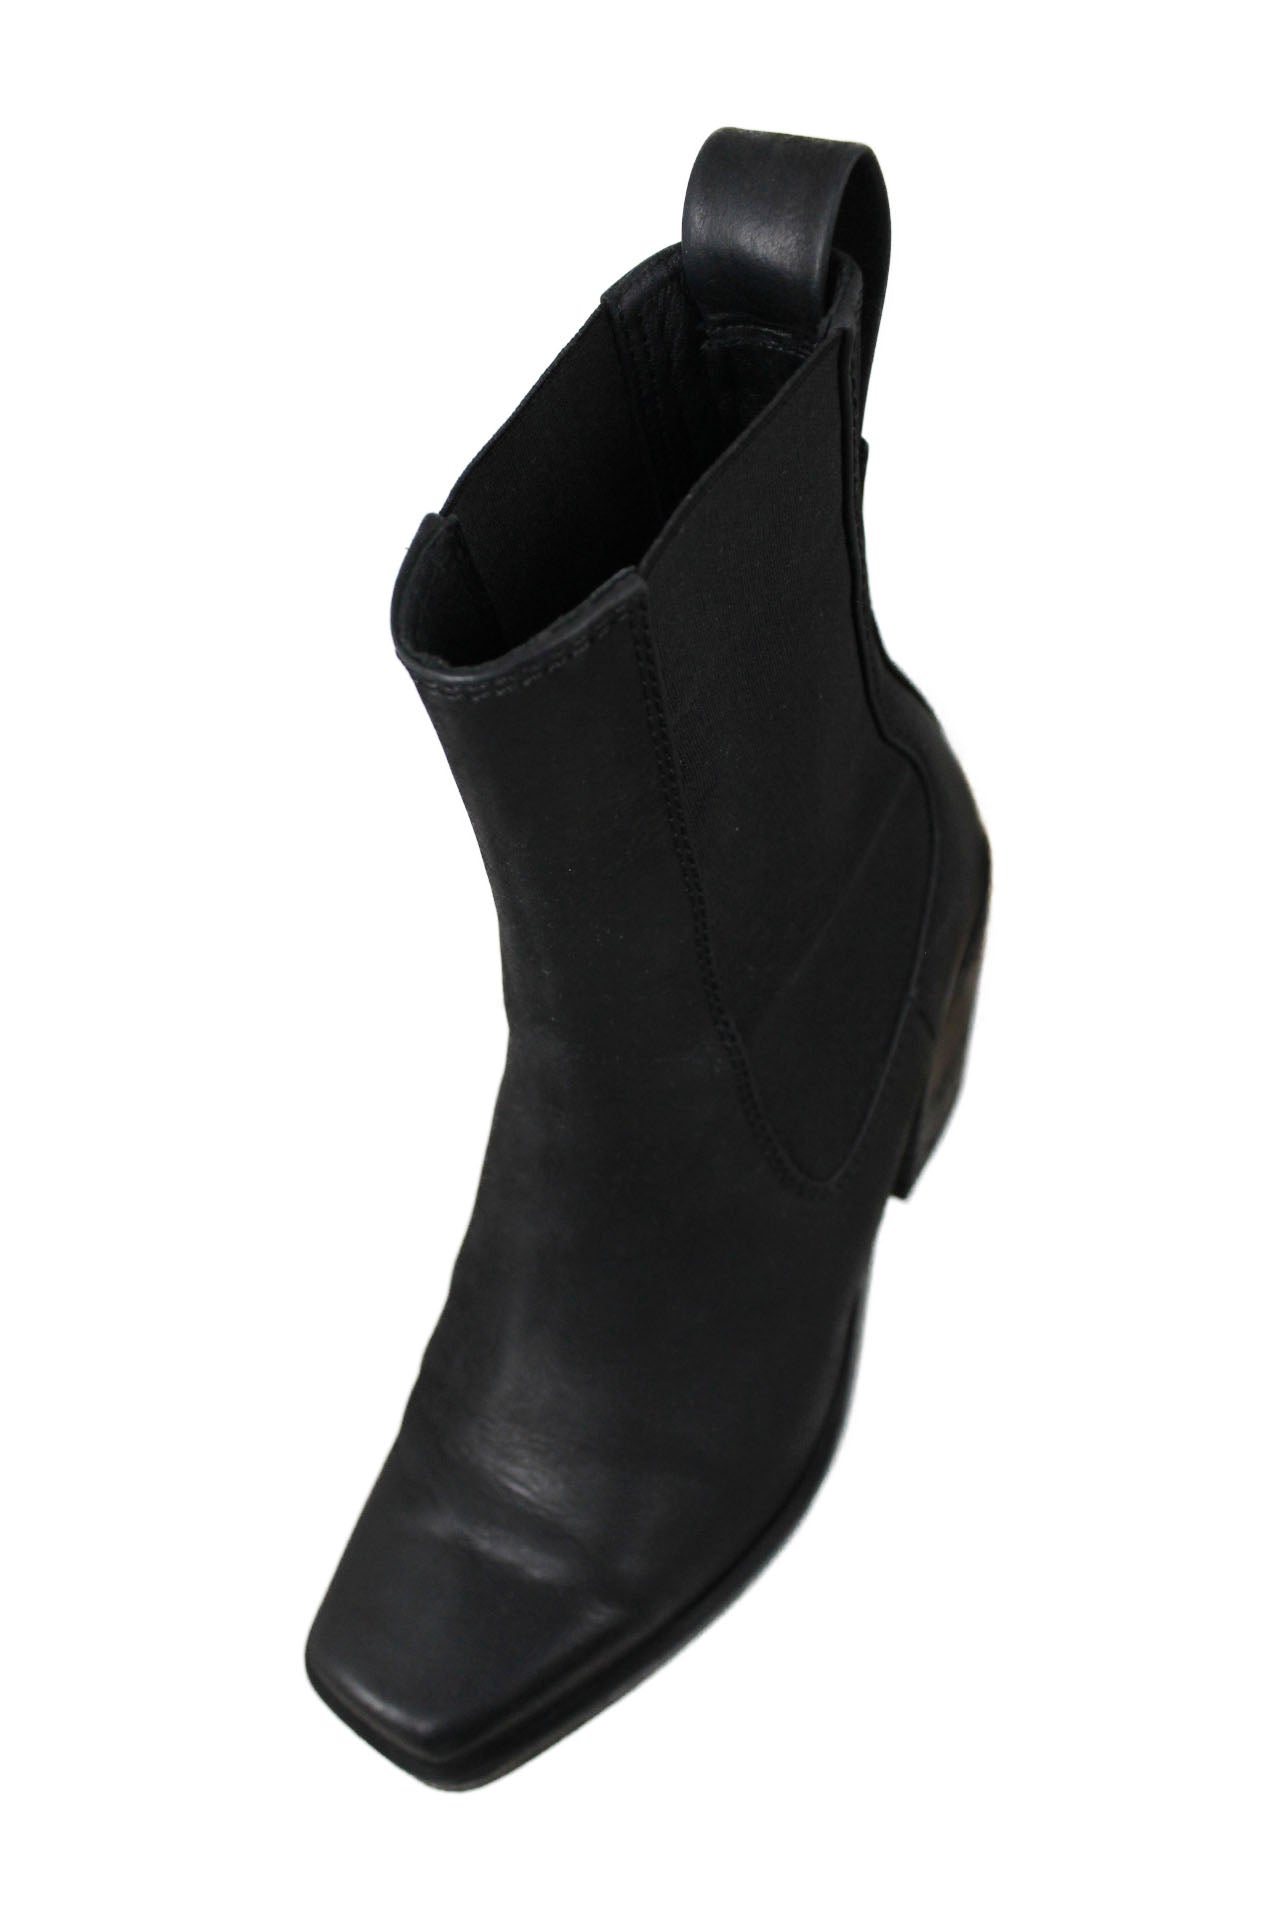 above angle of boots with square toe. 